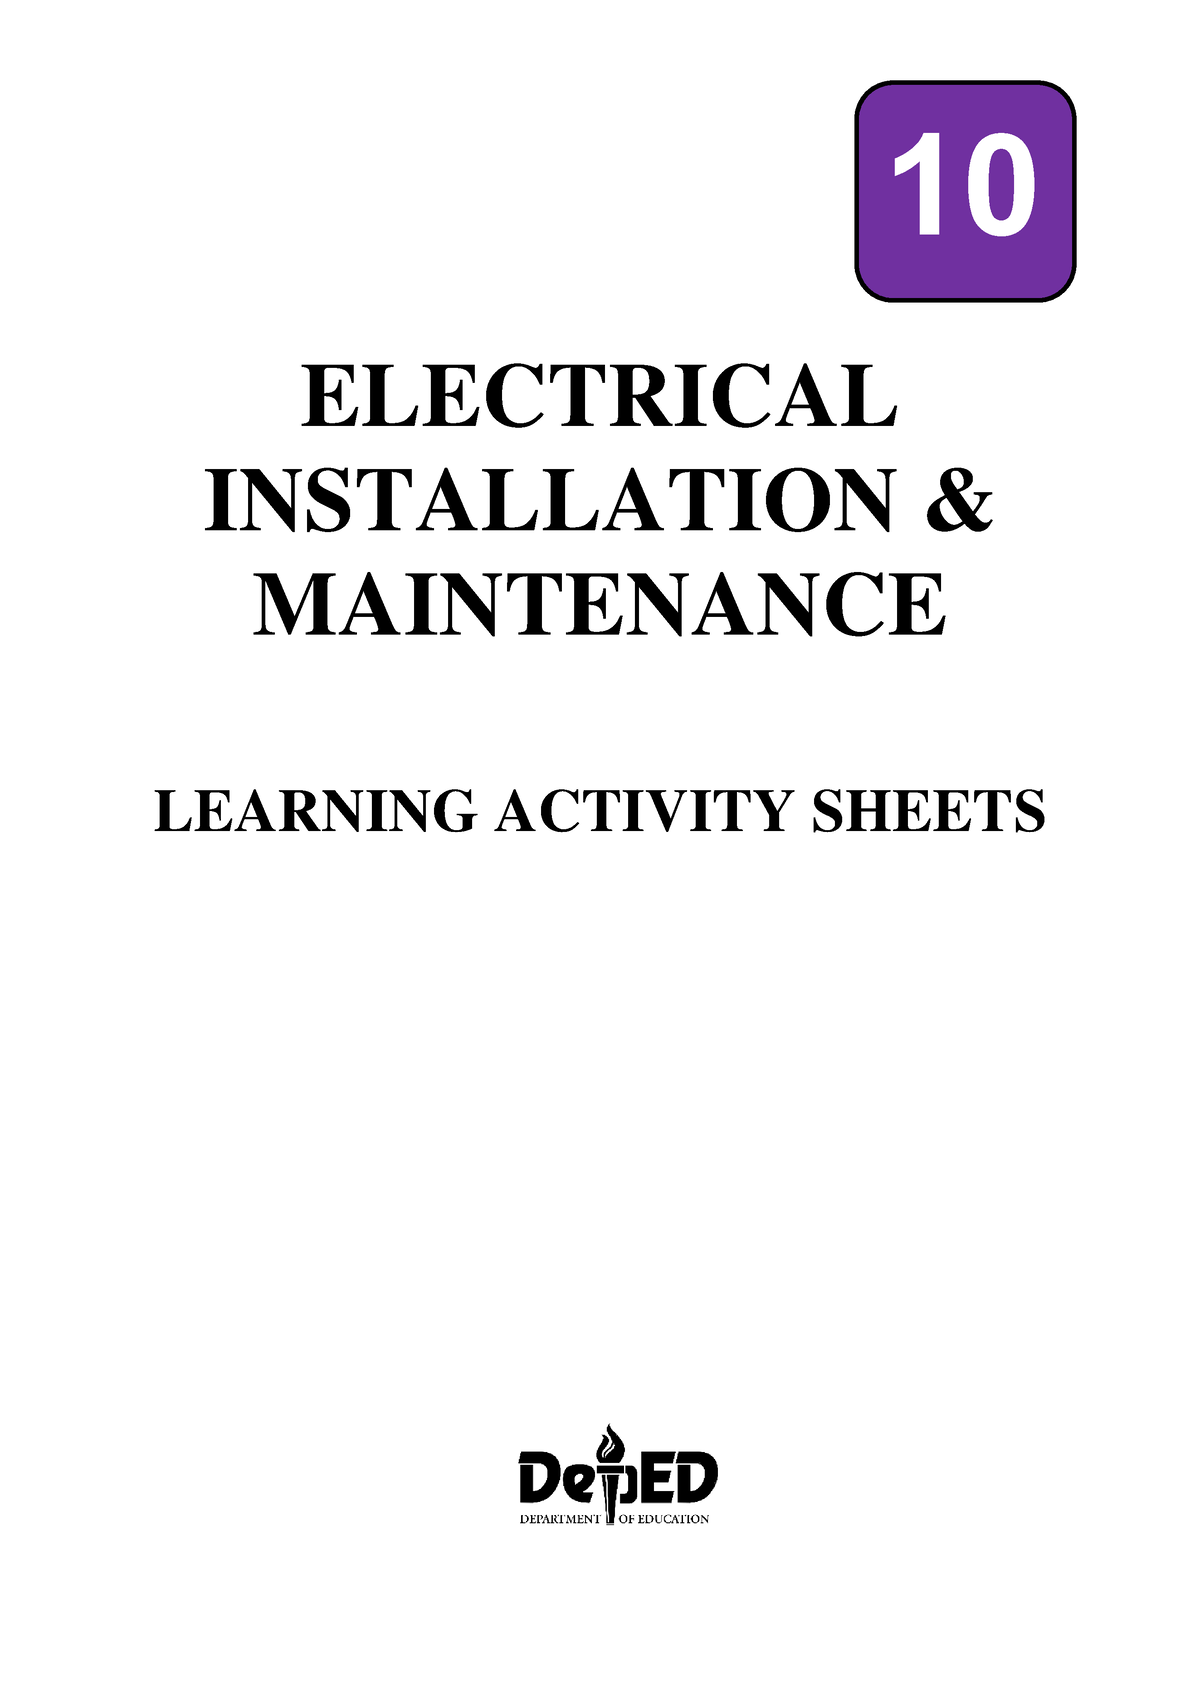 Grade 10 Tle Eim Compress Electrical Installation And Maintenance Learning Activity Sheets 10 4257